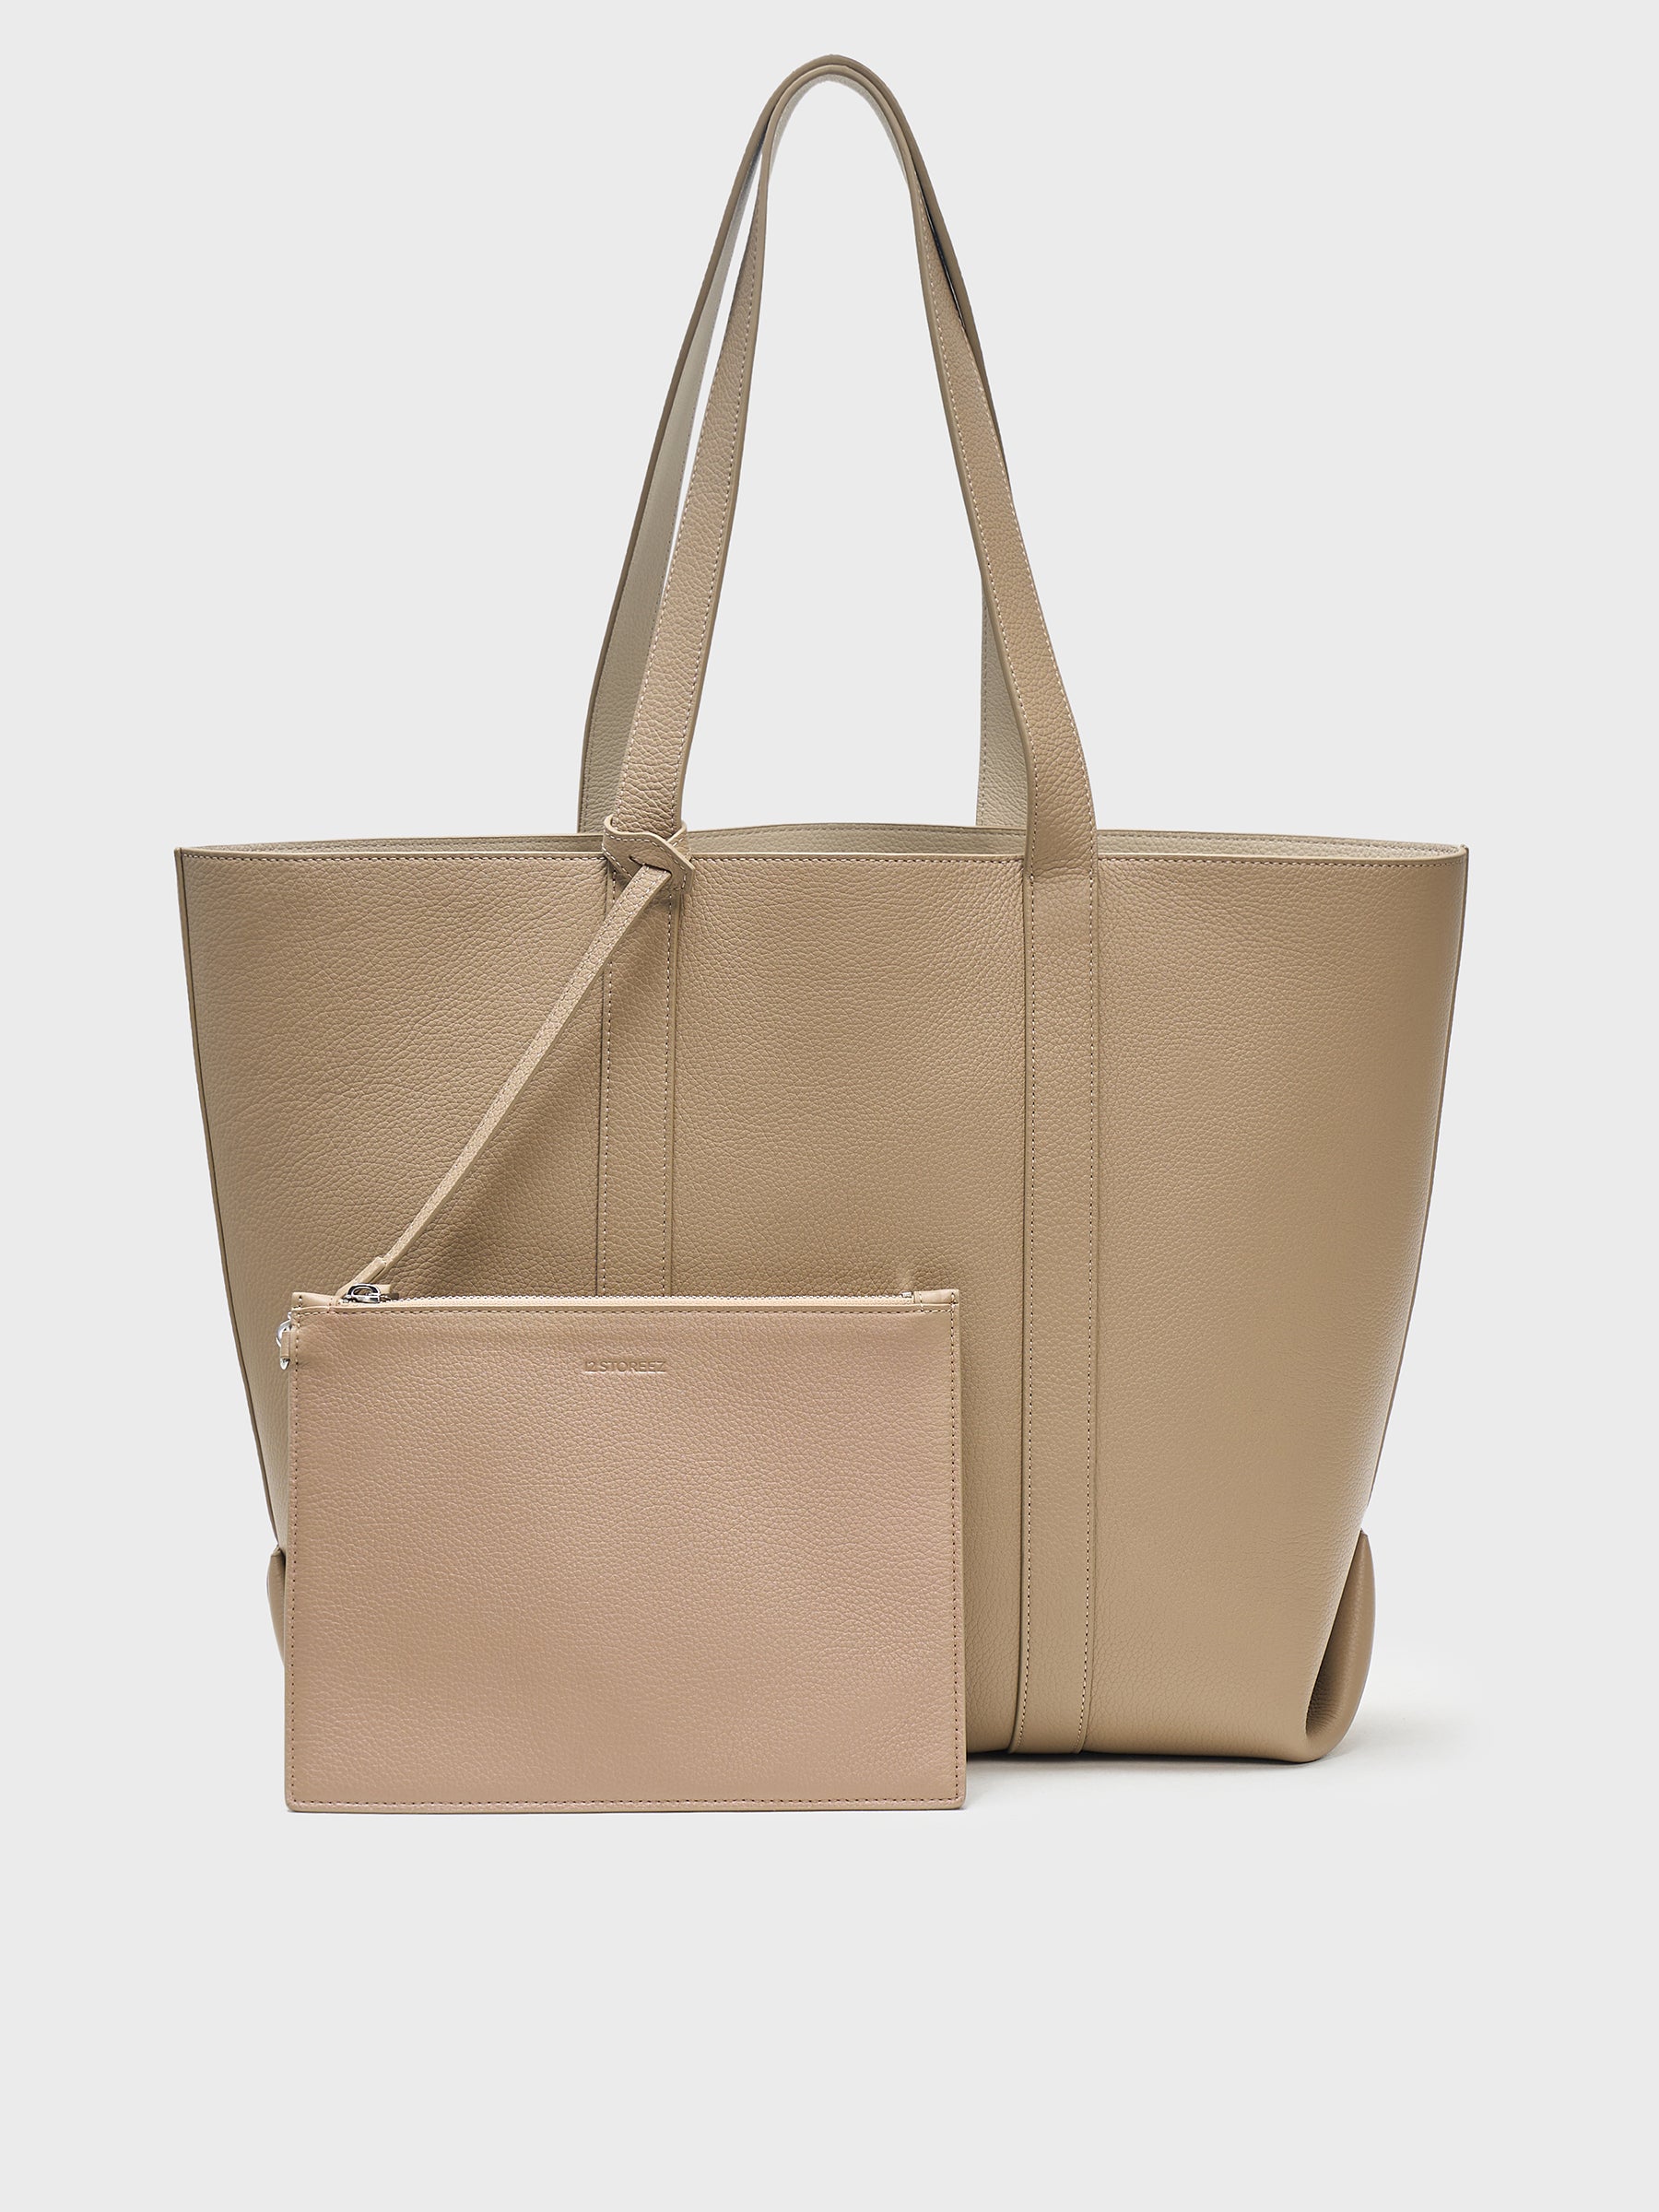 Double-sided tote bag